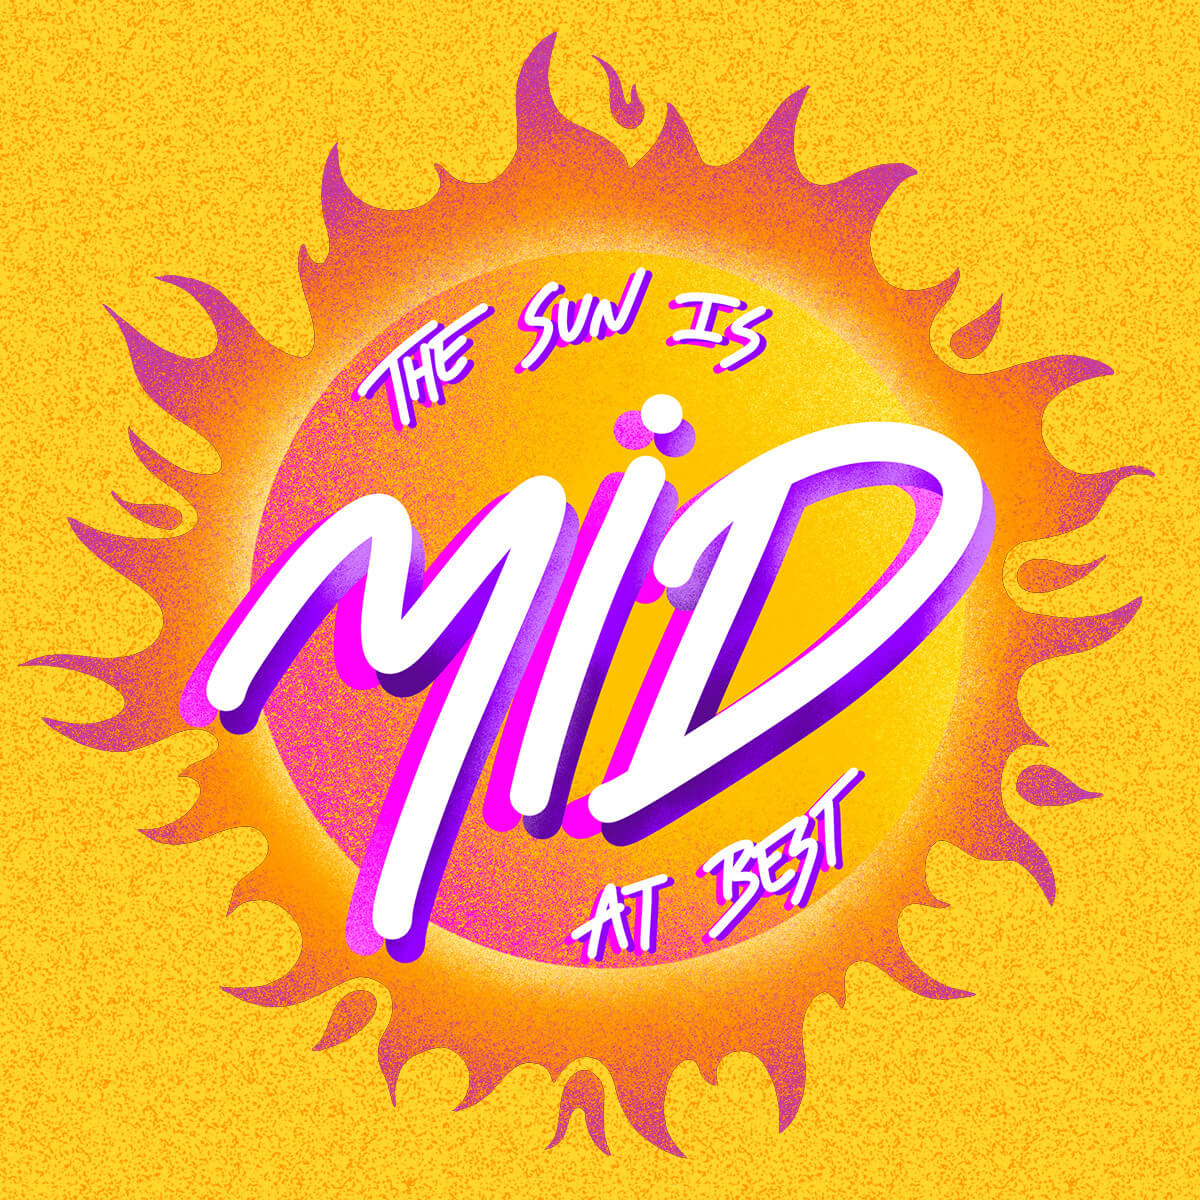 The Sun Is Mid at Best wallpaper version